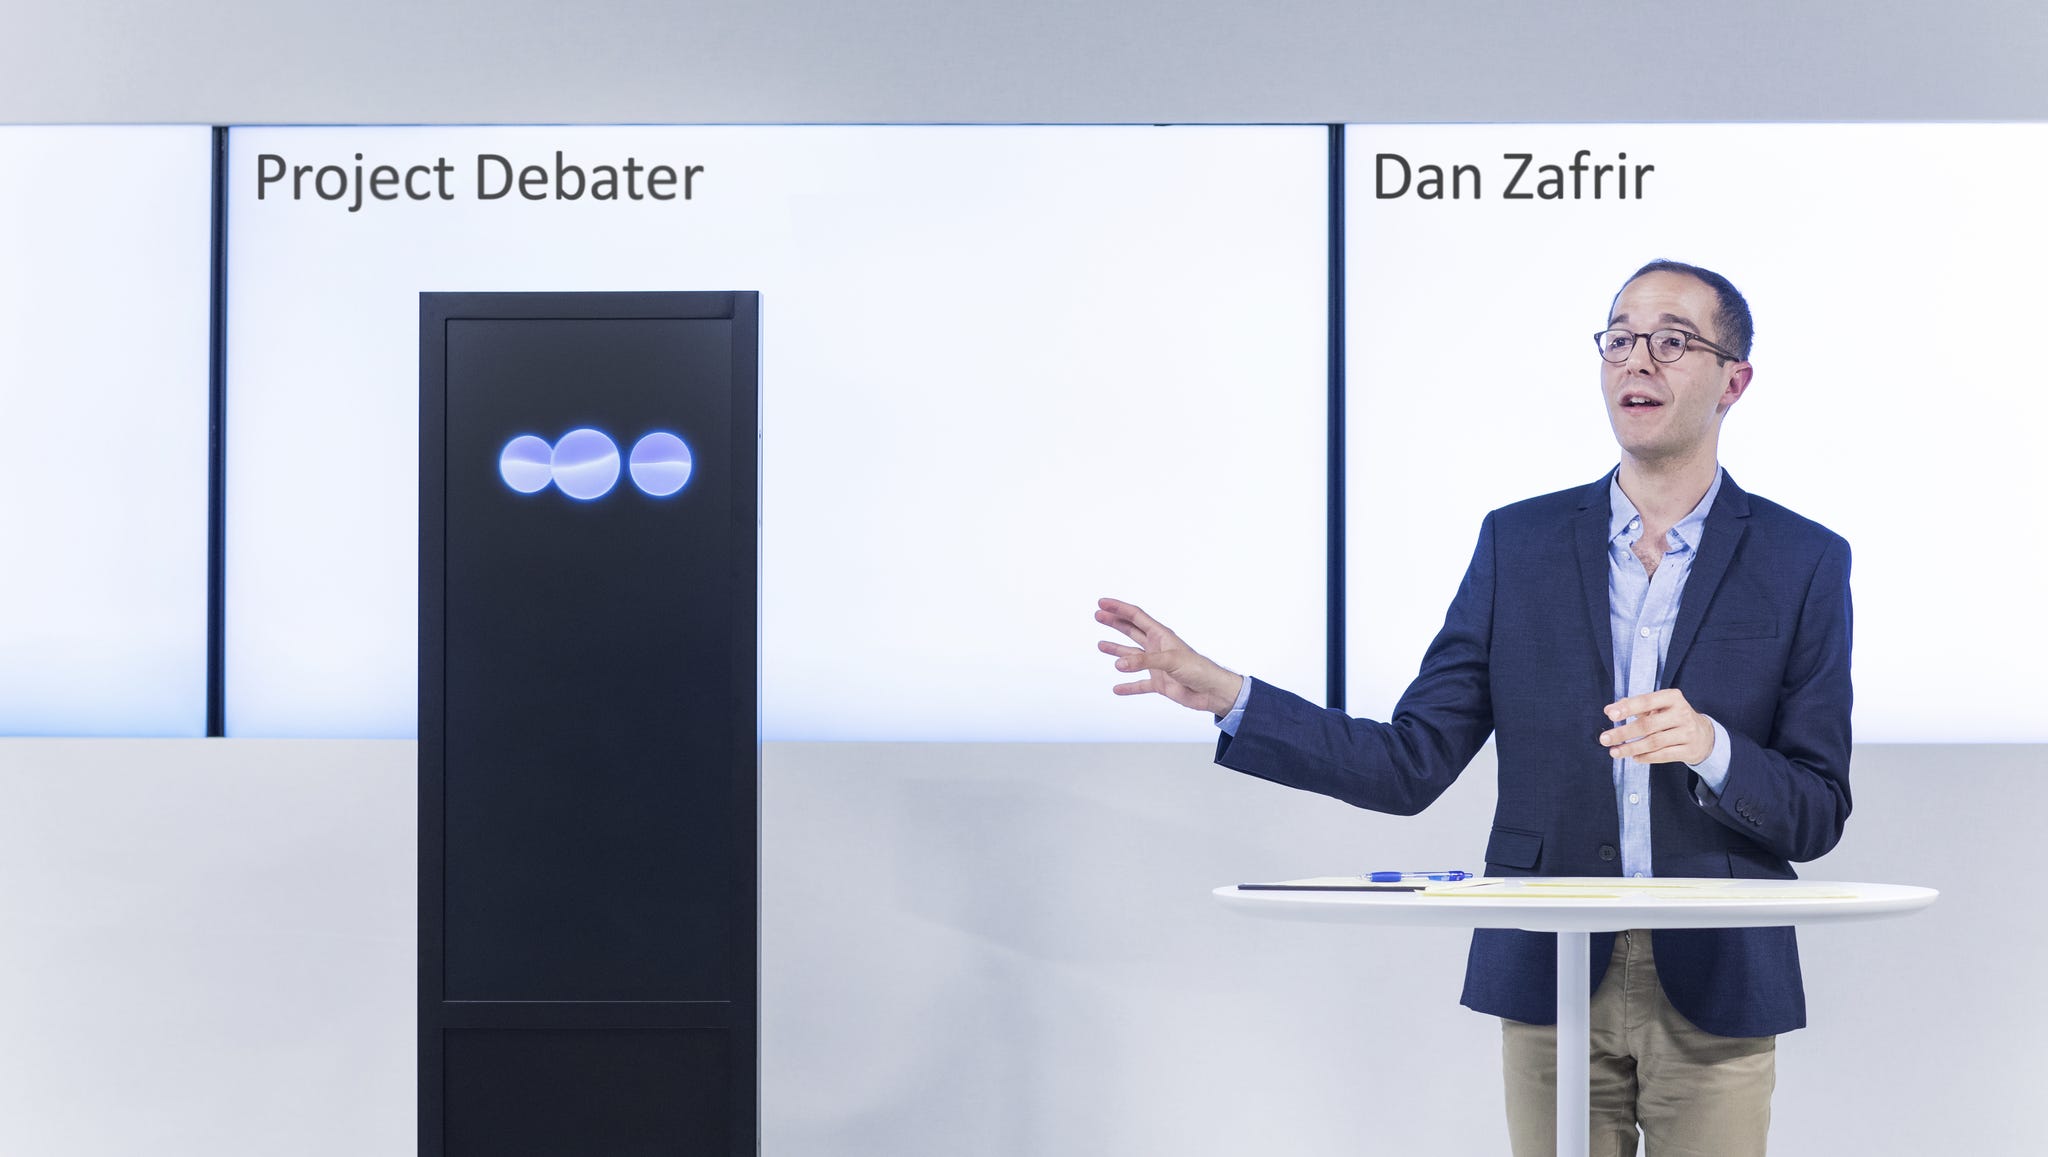 Ibm S Project Debater Uses Artificial Intelligence To Debate A Human